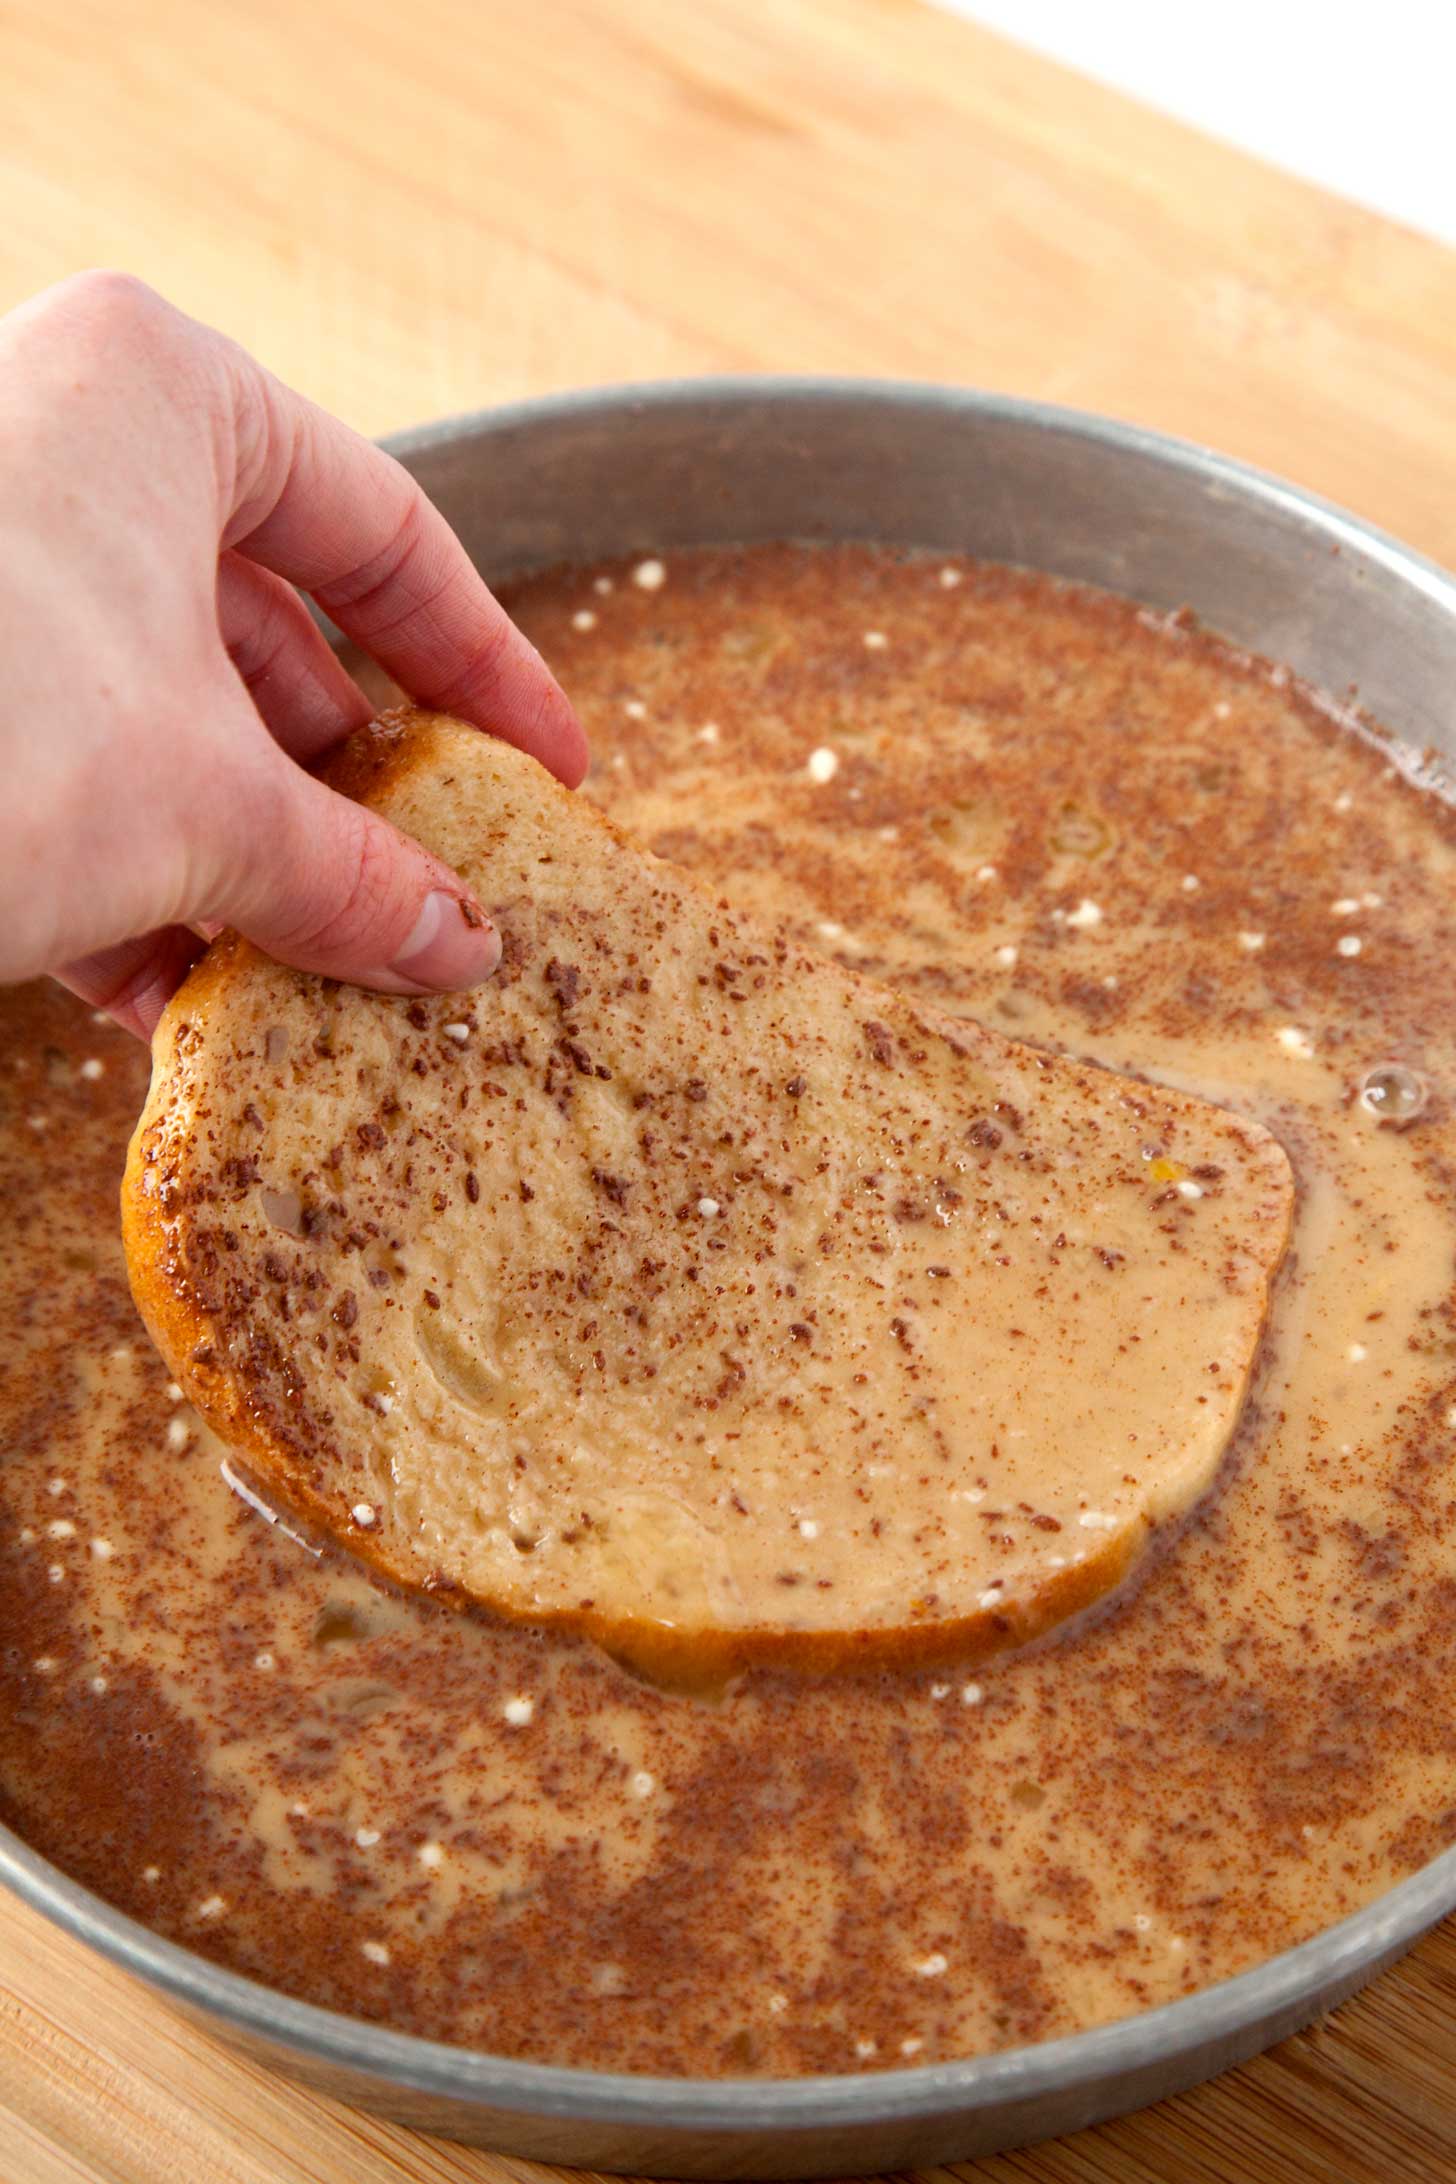 A hand dipping bread into french toast batter.